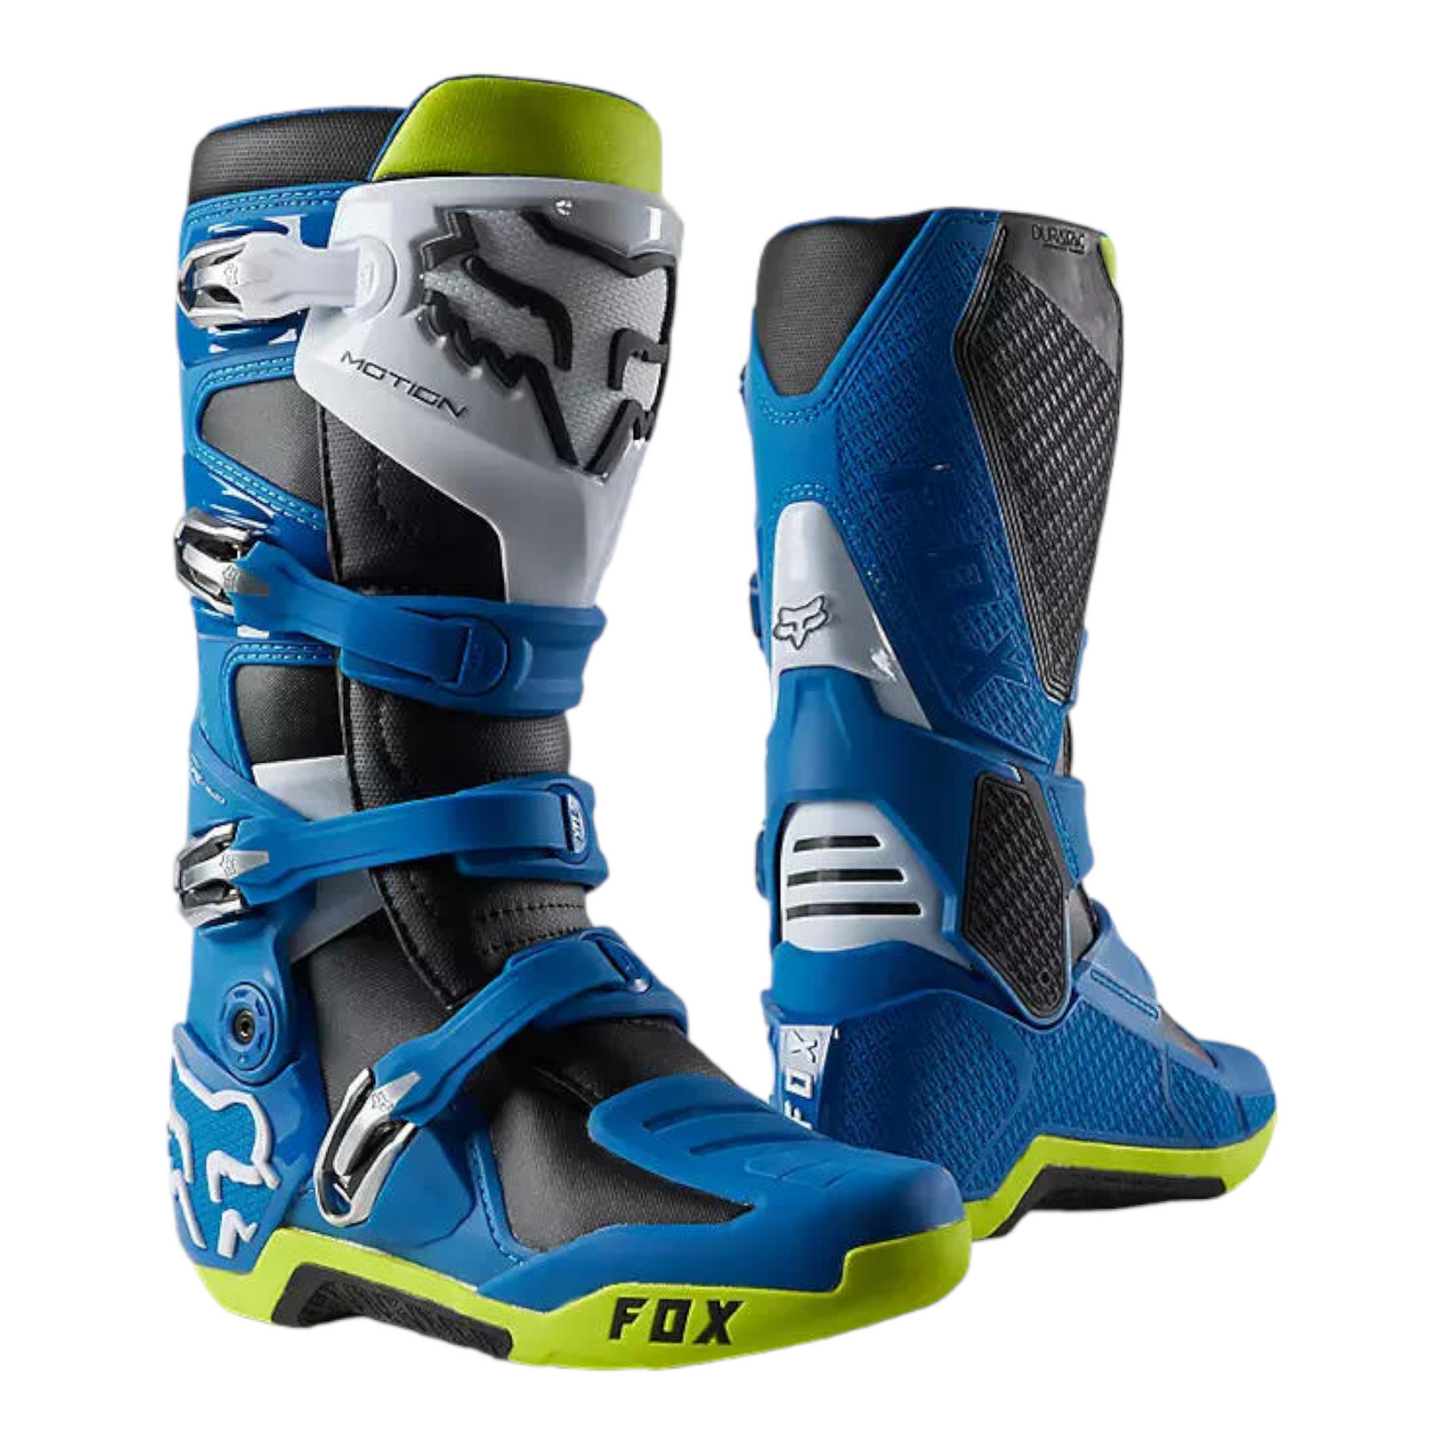 Botas Fox Motion Blue/Yellow Limited Edition